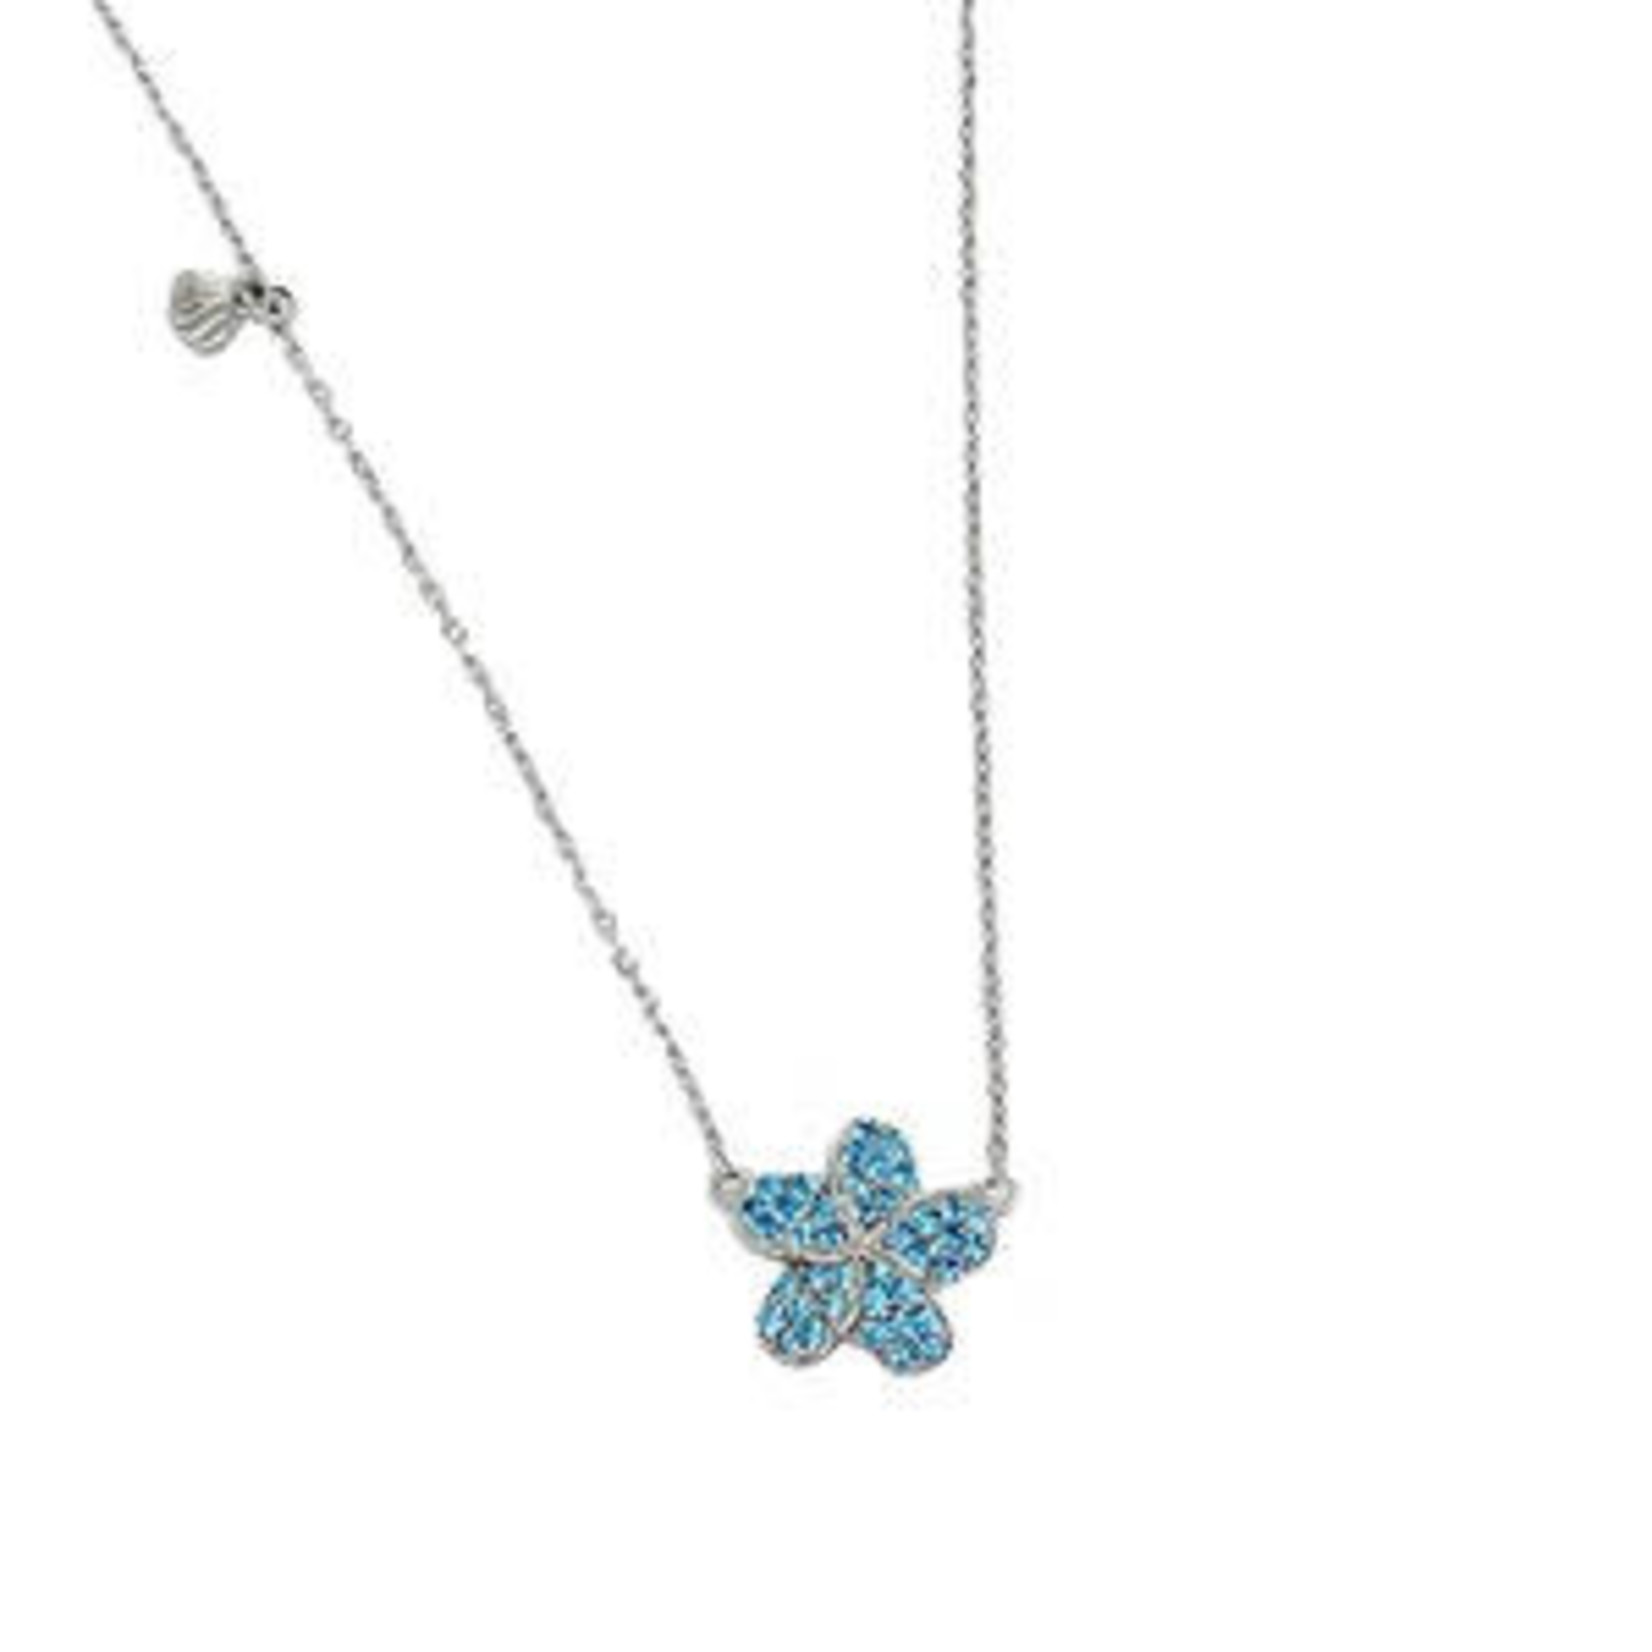 Sterling Silver Necklace with Adjustable Chain Blue Topaz Plumeria